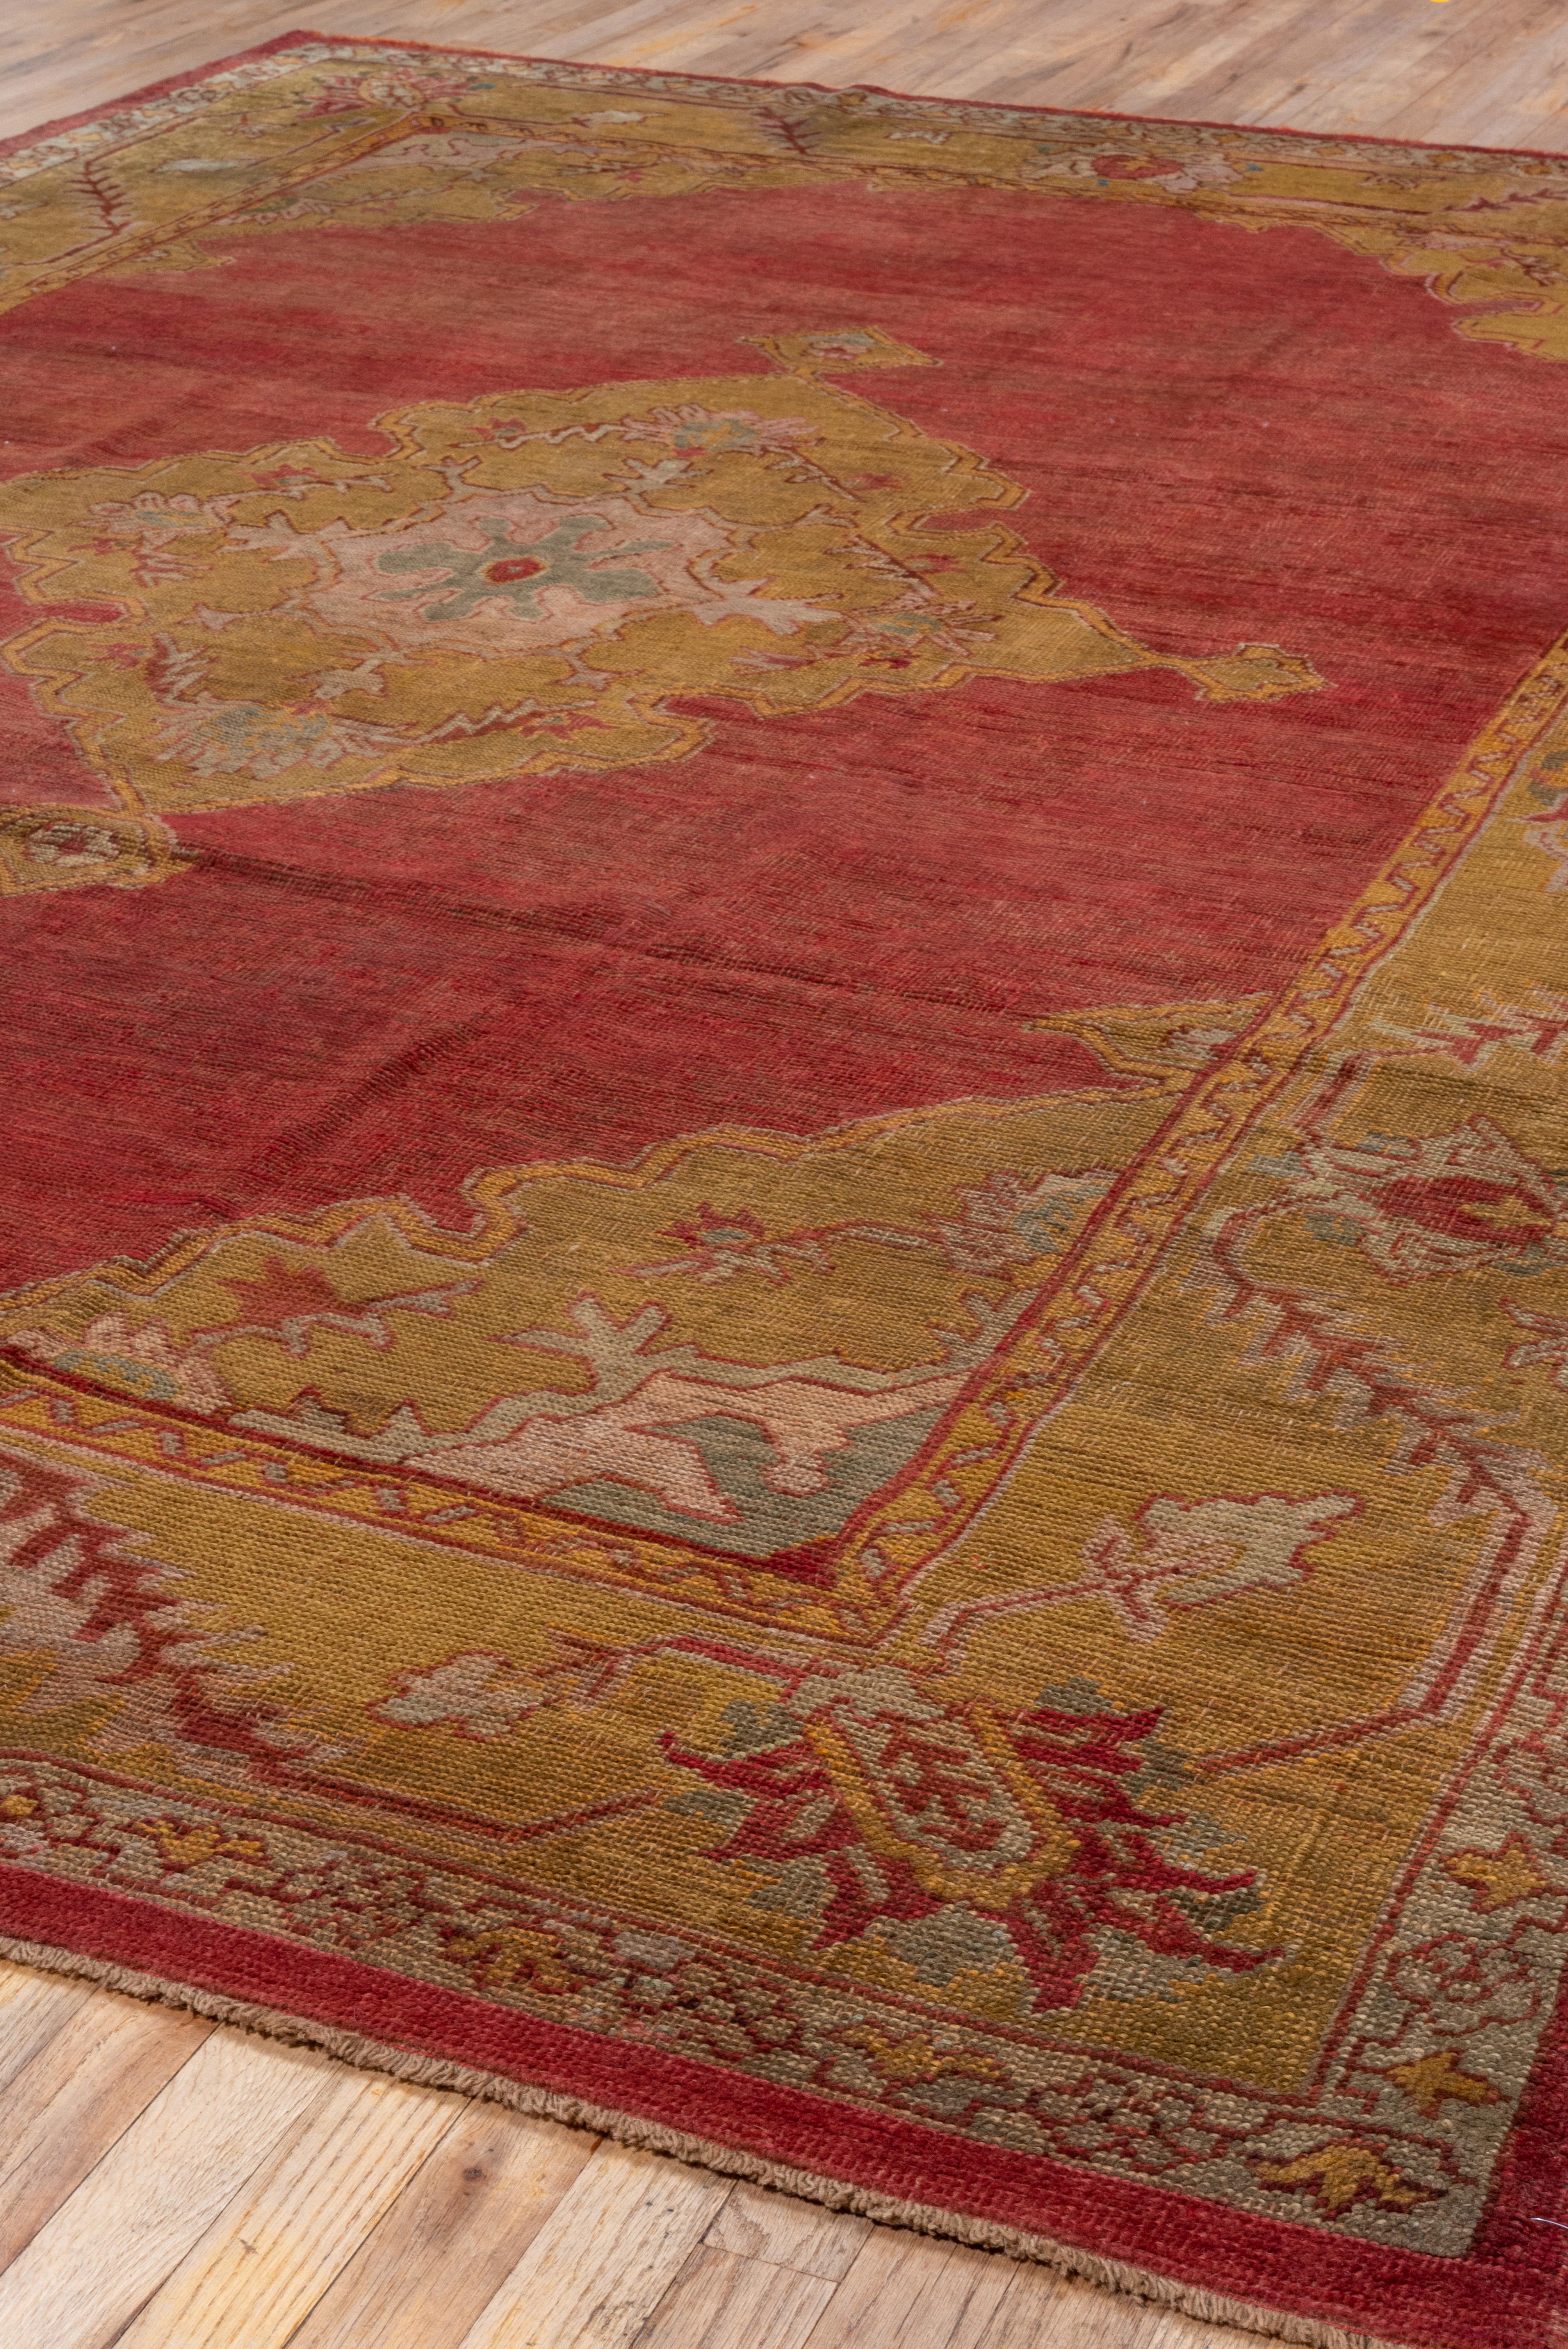 Early 20th Century Antique Turkish Oushak Rug, Red Field and Gold Borders, Center Medallion For Sale